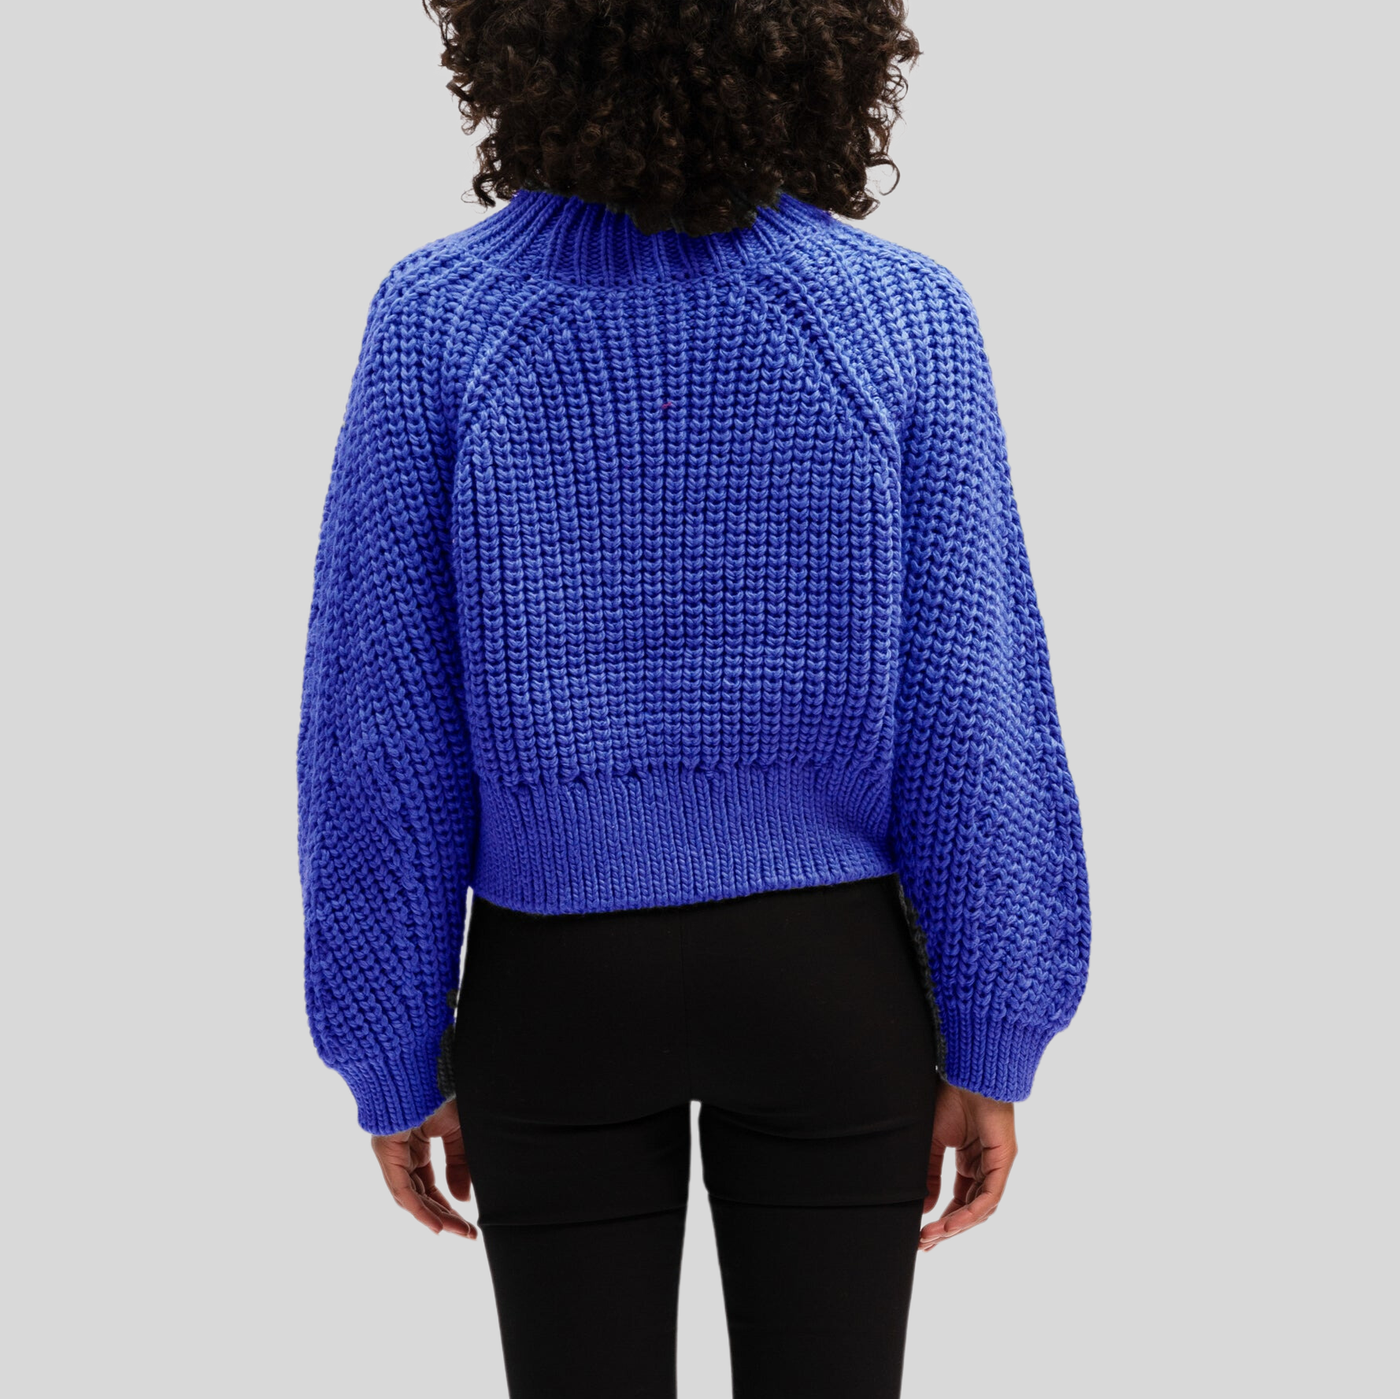 Gotstyle Fashion - We Are The Others Sweaters Chunky Knit High Neck Sweater - Cobalt